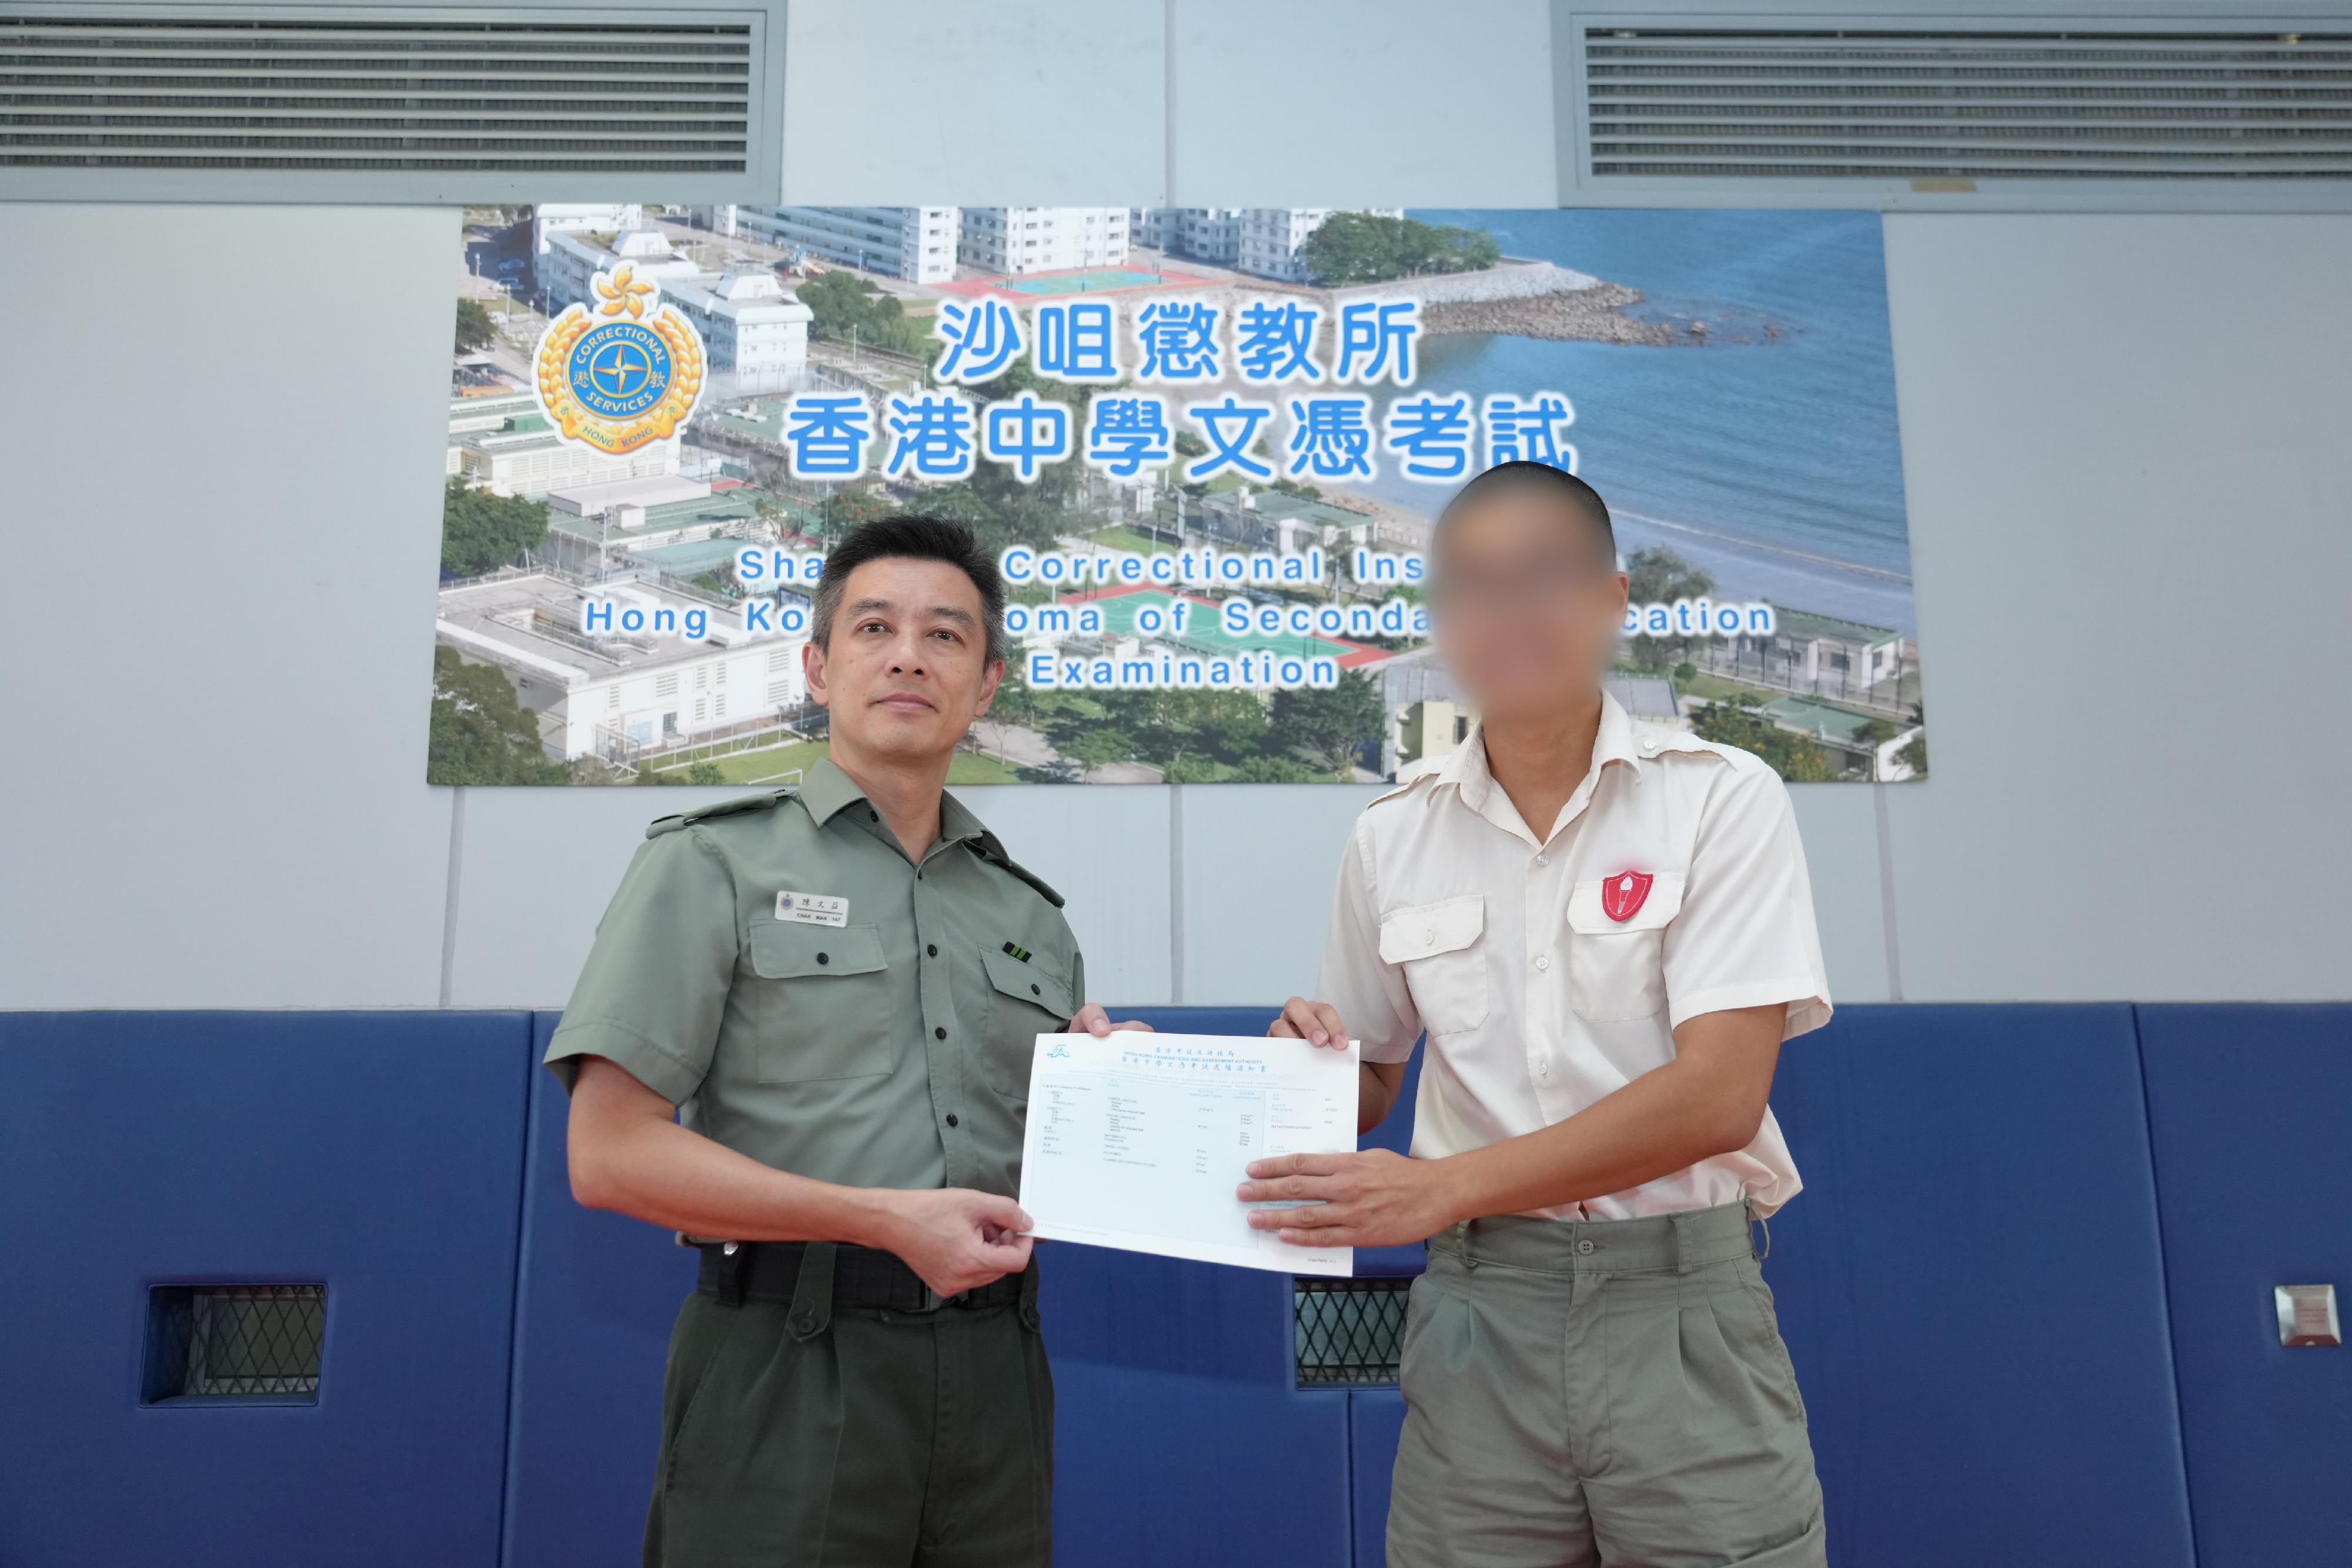 The results of the Hong Kong Diploma of Secondary Education (HKDSE) Examination were released today (July 19). Eighteen young persons in custody (PICs) enrolled in the HKDSE Examination this year. Photo shows the Superintendent of Sha Tsui Correctional Institution, Mr Chan Man-yat (left), presenting an examination certificate to a young PIC.